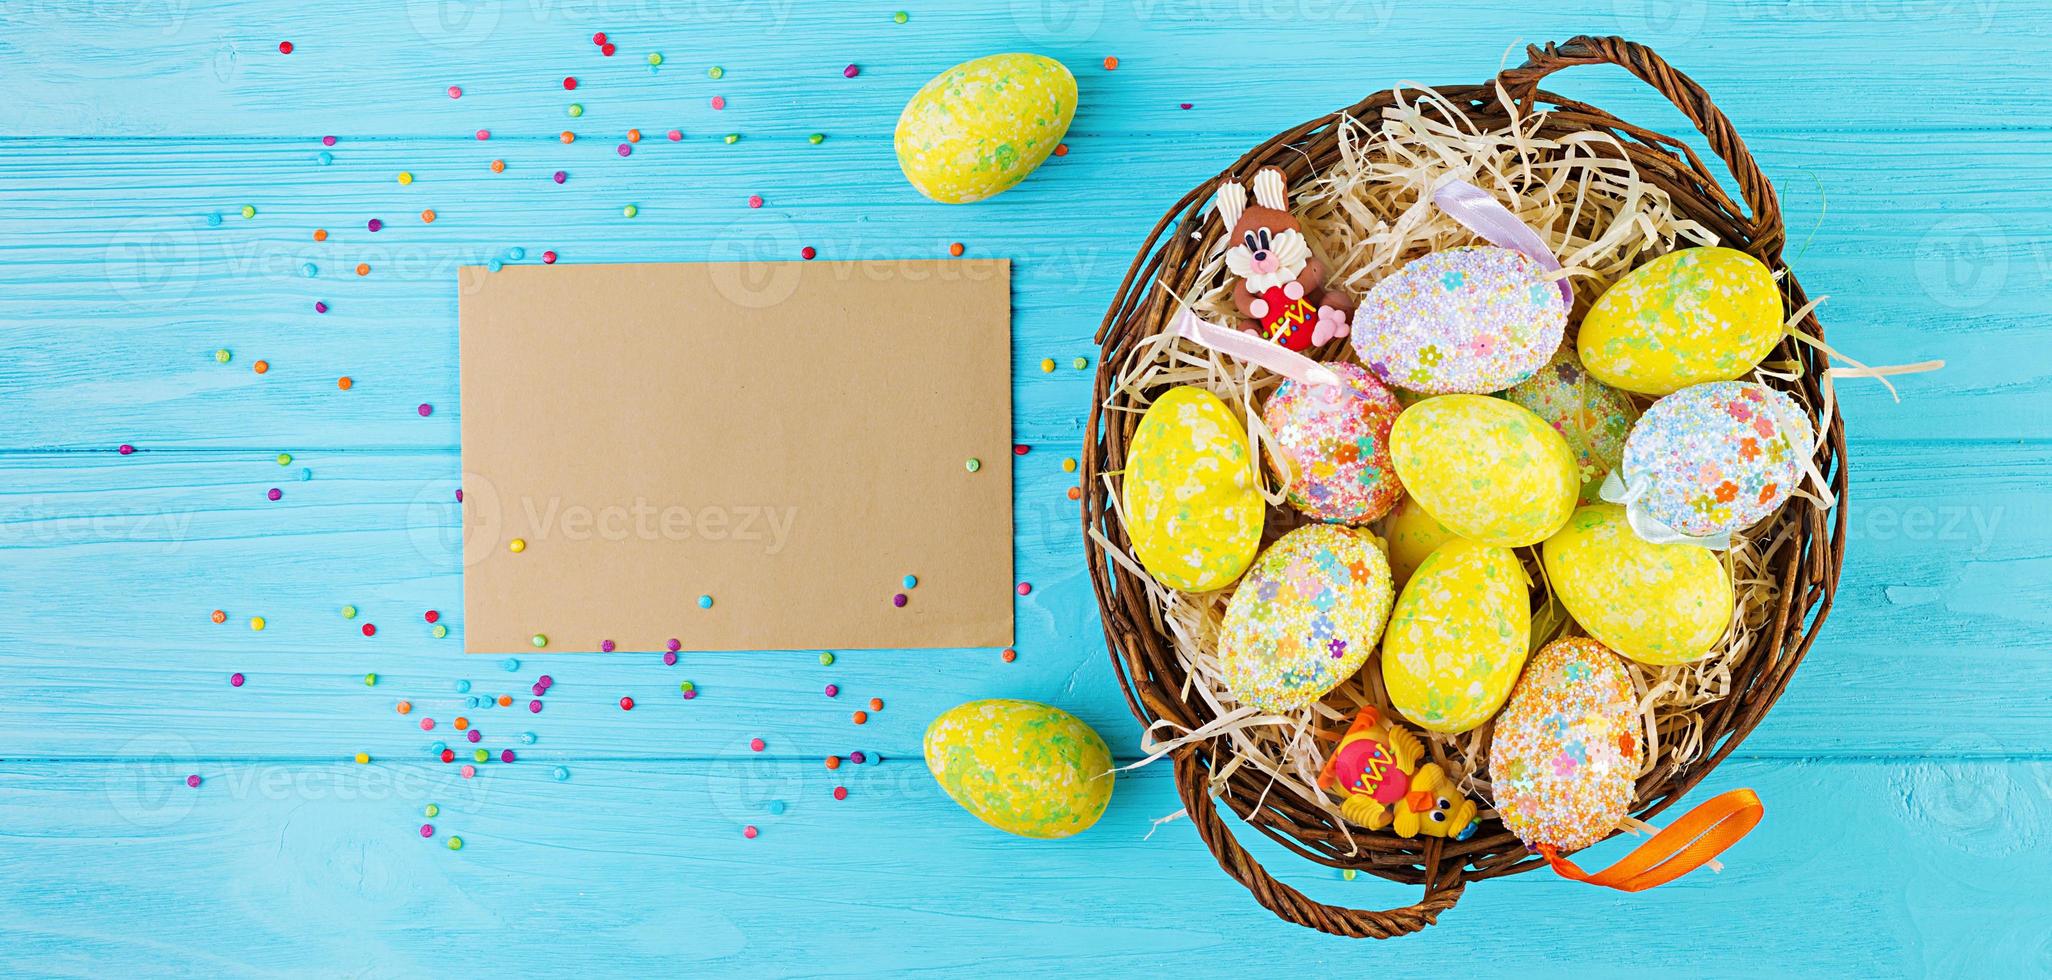 Banner with easter background. Background with flowers and easter eggs. Top view photo